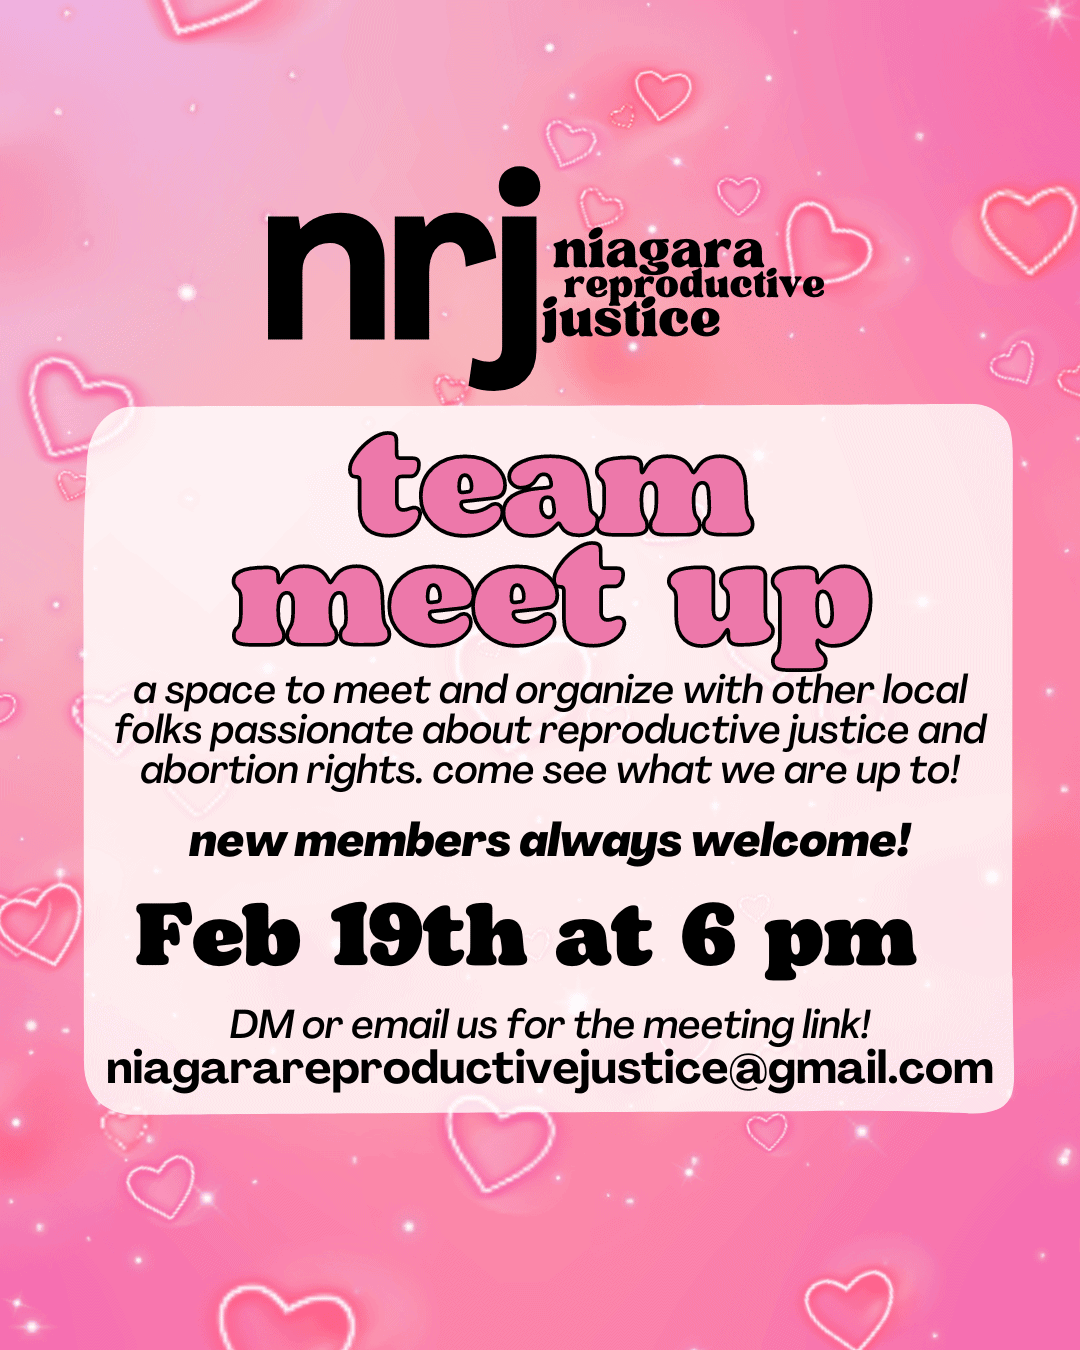 team meet up. a space to meet and organize with other local folks passionate about reproductive justice and abortion rights. come see what we are up to! new members always welcome! Feb 19th at 6 pm. DM or email us for the meeting link! niagarareproductivejustice@gmail.com